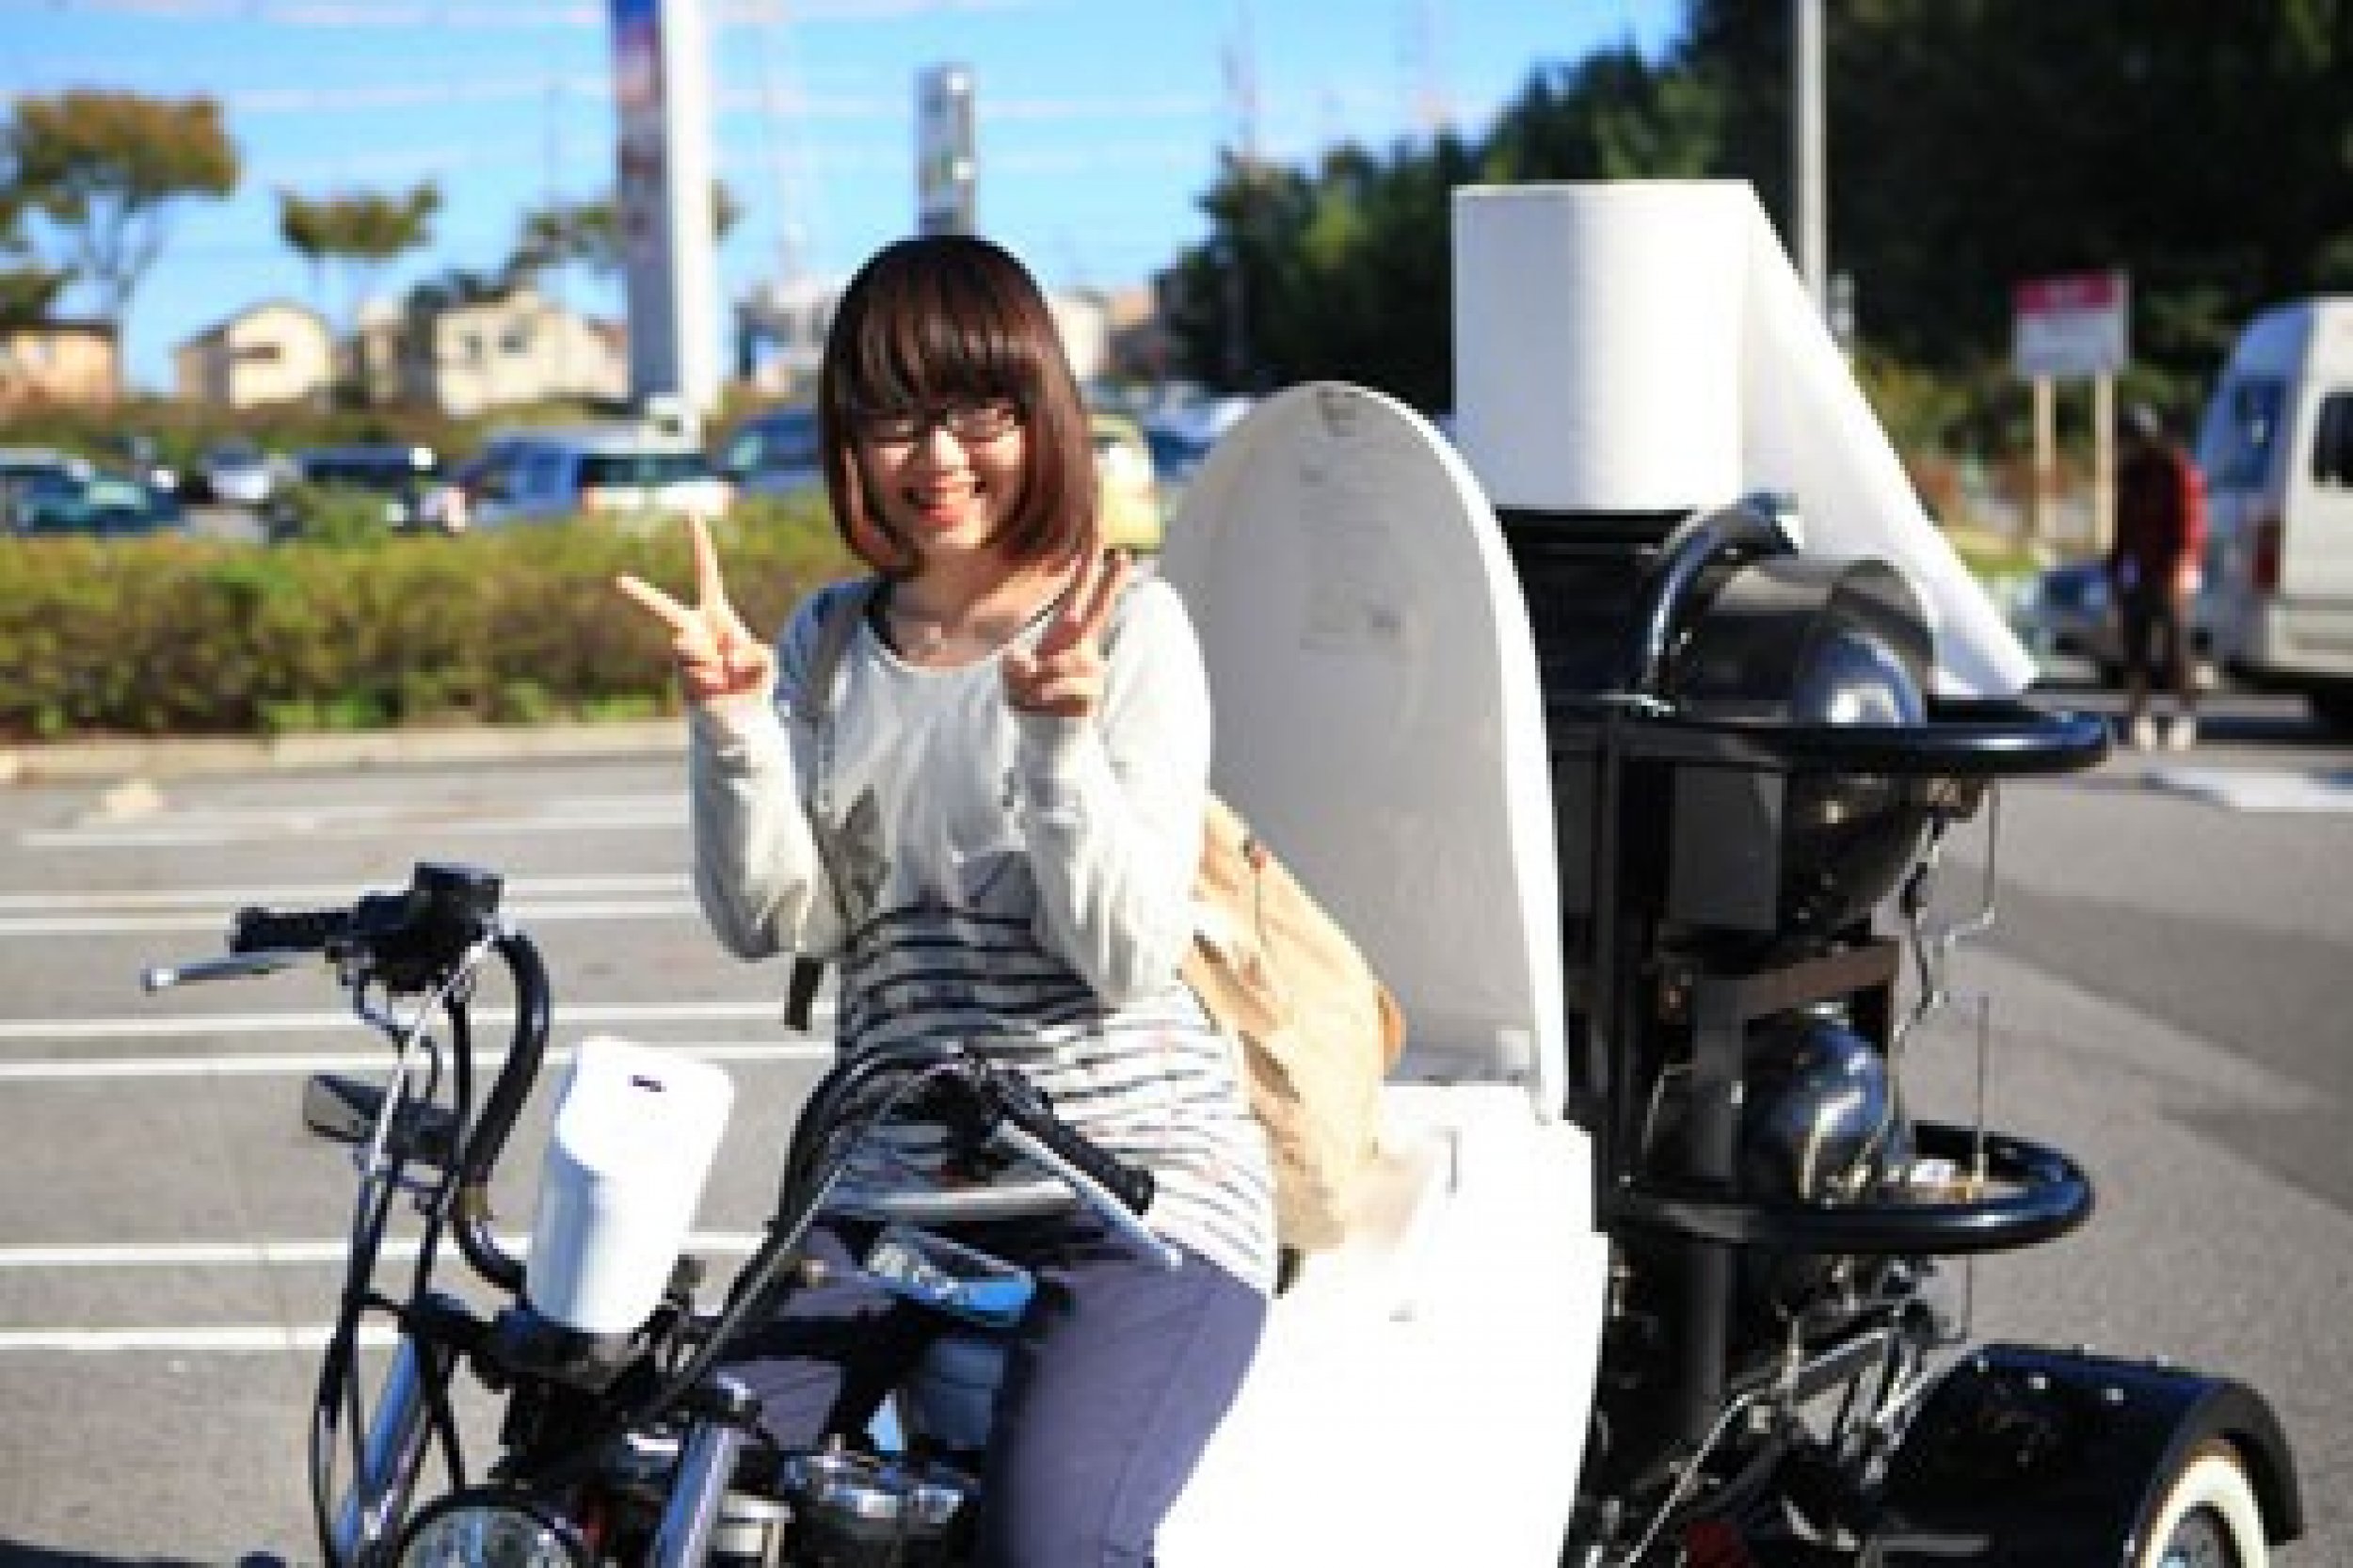 A fan sits happily on the Toilet Bike Neos seat.